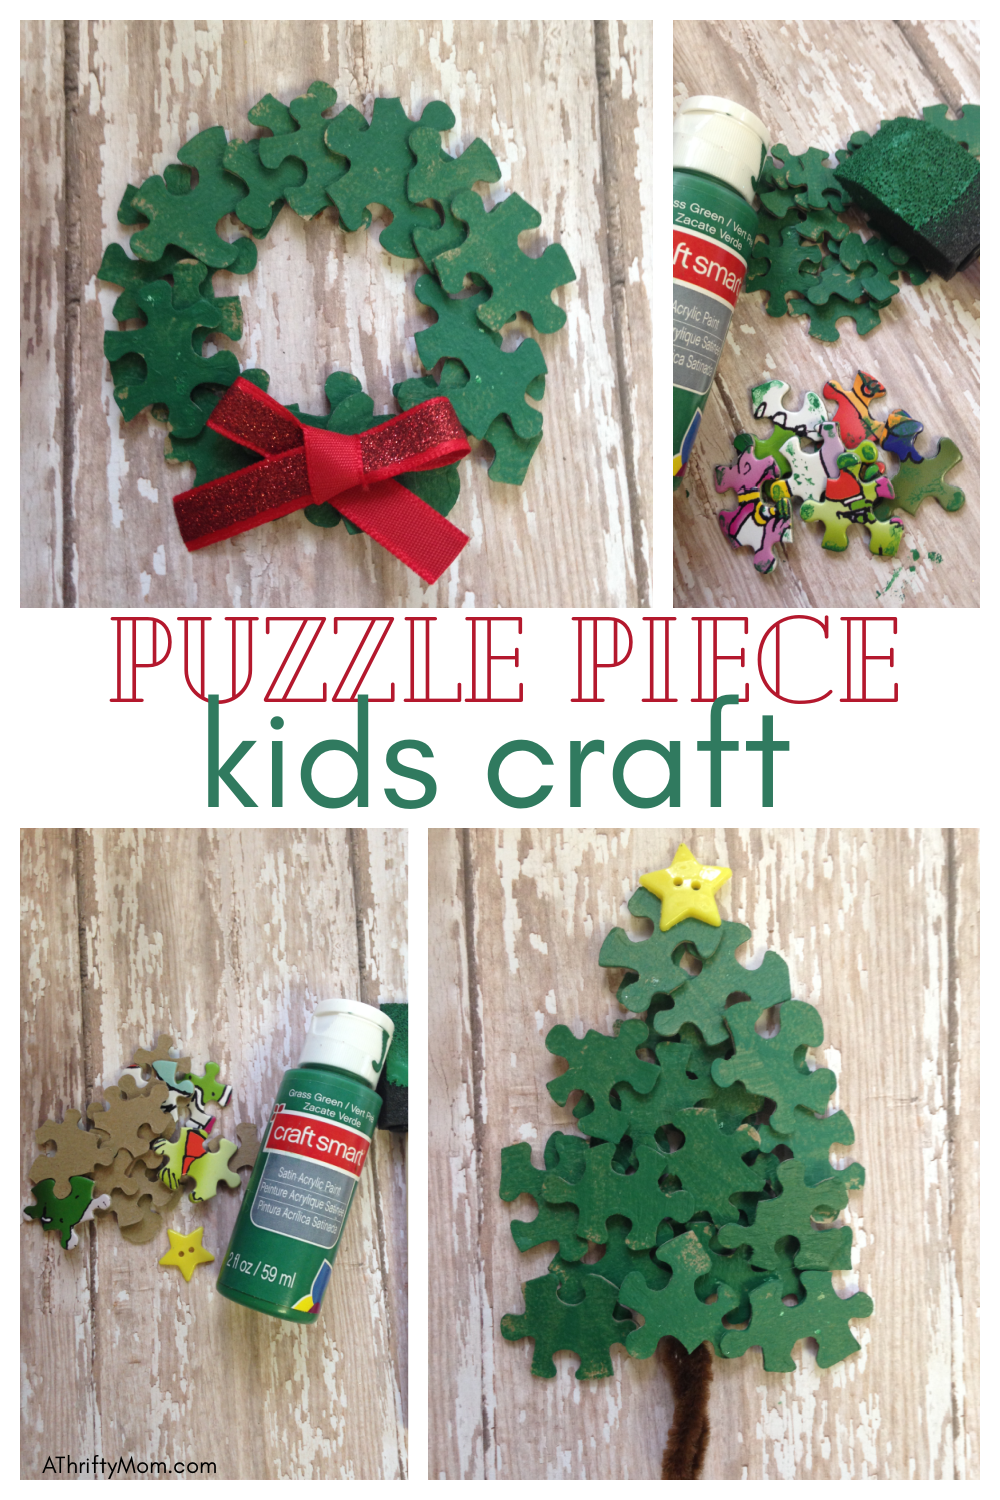 Fun DIY Puzzle Piece Craft Ideas (for kids & adults!)